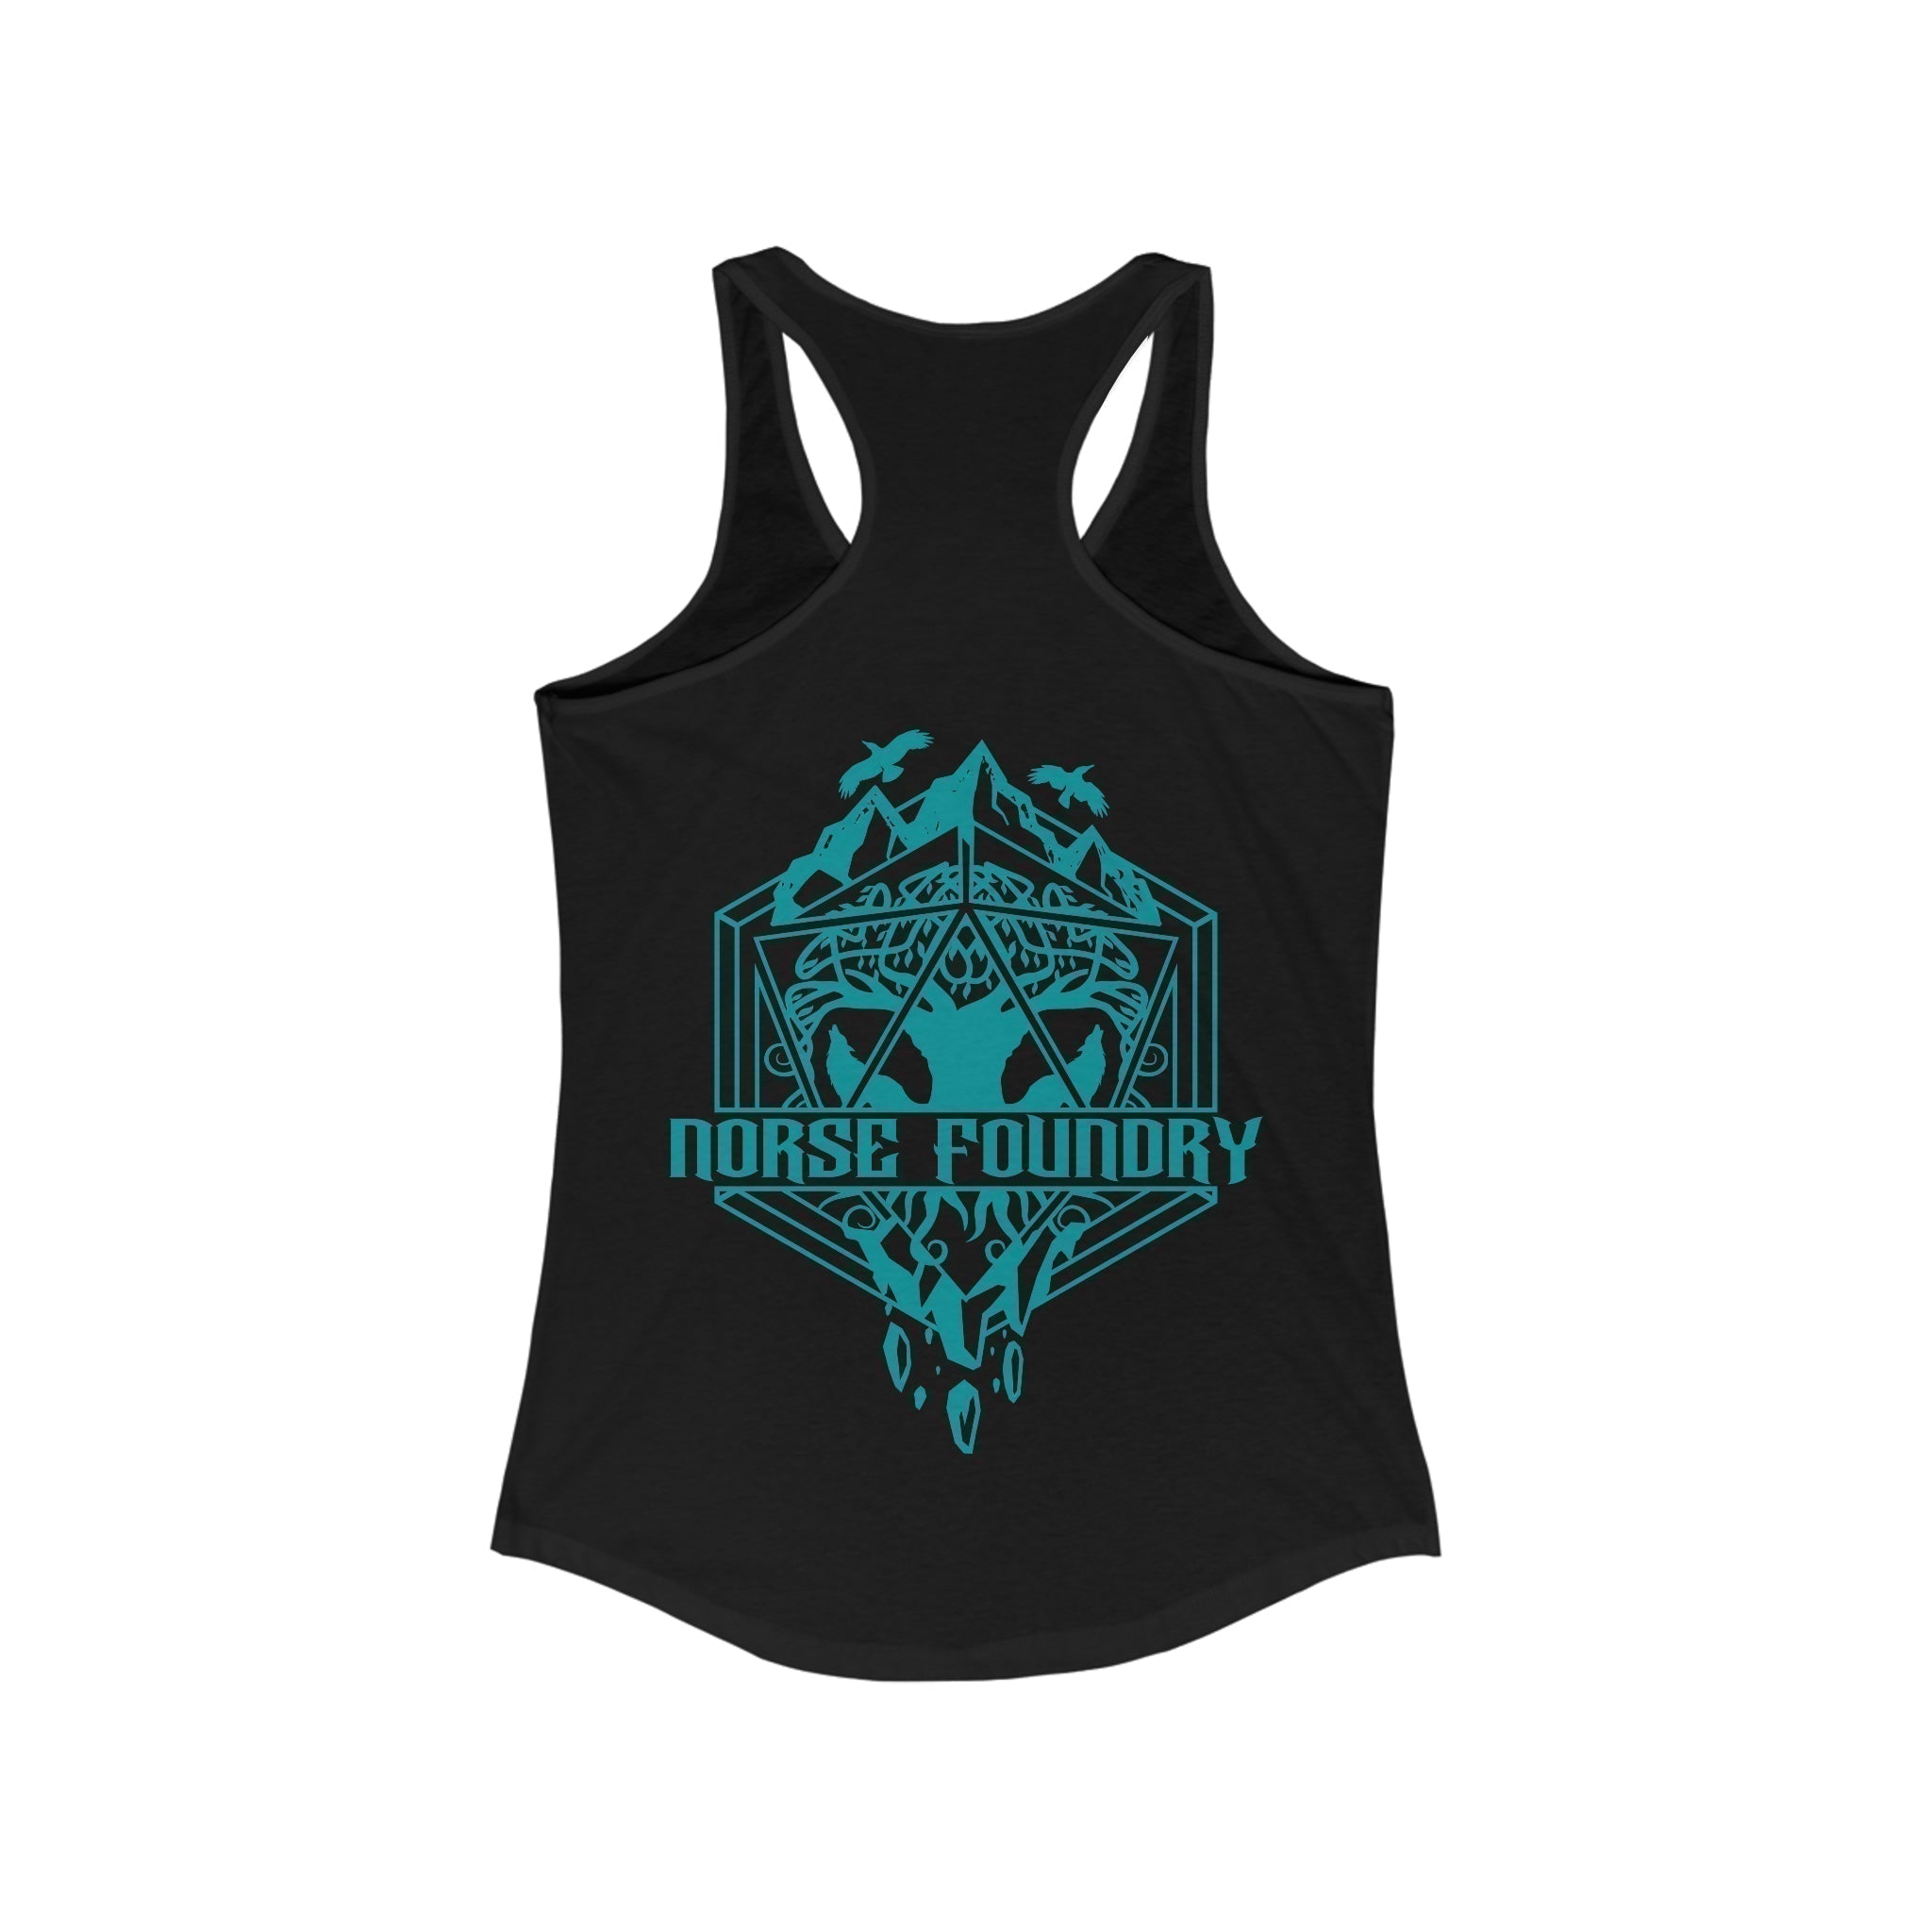 Roll for Adventure - Norse Foundry Women's Tank Top - 15474515268568688785